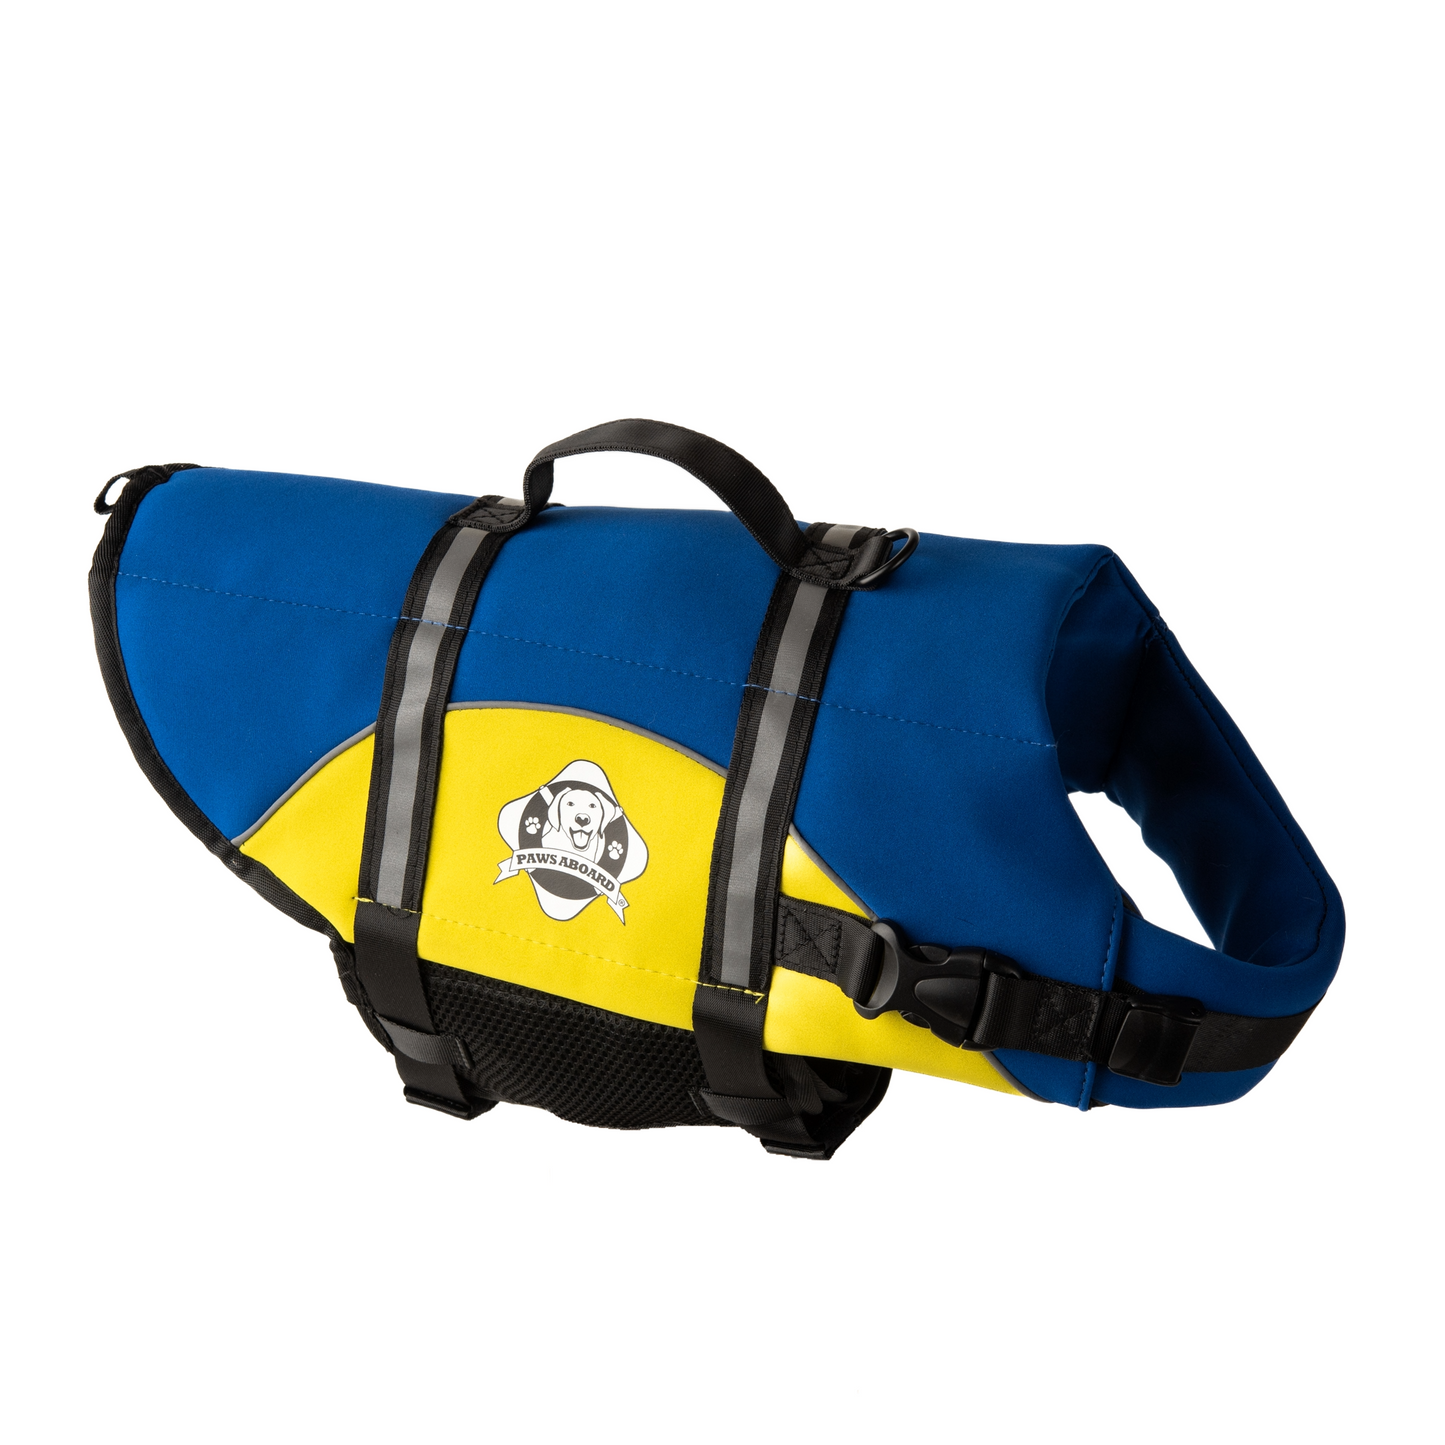 Blue and yellow dog life jacket with breathable mesh underbelly, reflective straps for high visibility, leash clip, and a top handle. Featuring Paws Aboard logo of a dog with a blue life ring around neck.